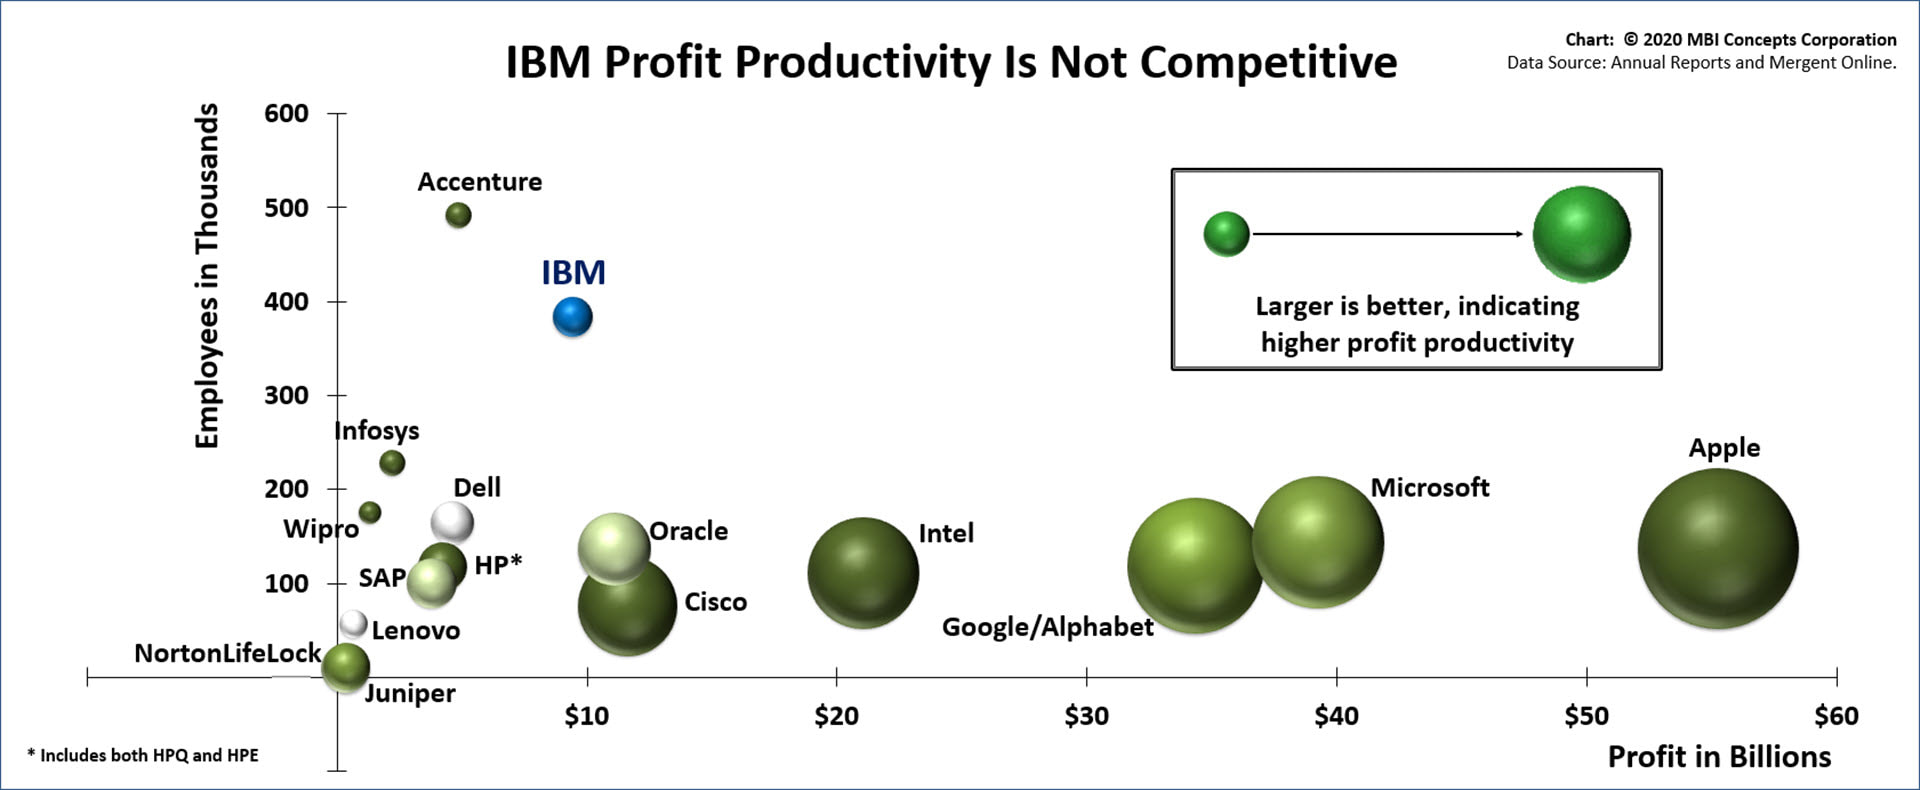 A Bubble Chart Showing IBM's Profit Productivity (Net Income Per Employee) in 1999 Against its Competitors: Microsoft, Intel, Google, Apple, Dell, SAP, HP, Juniper, Accenture, and others.